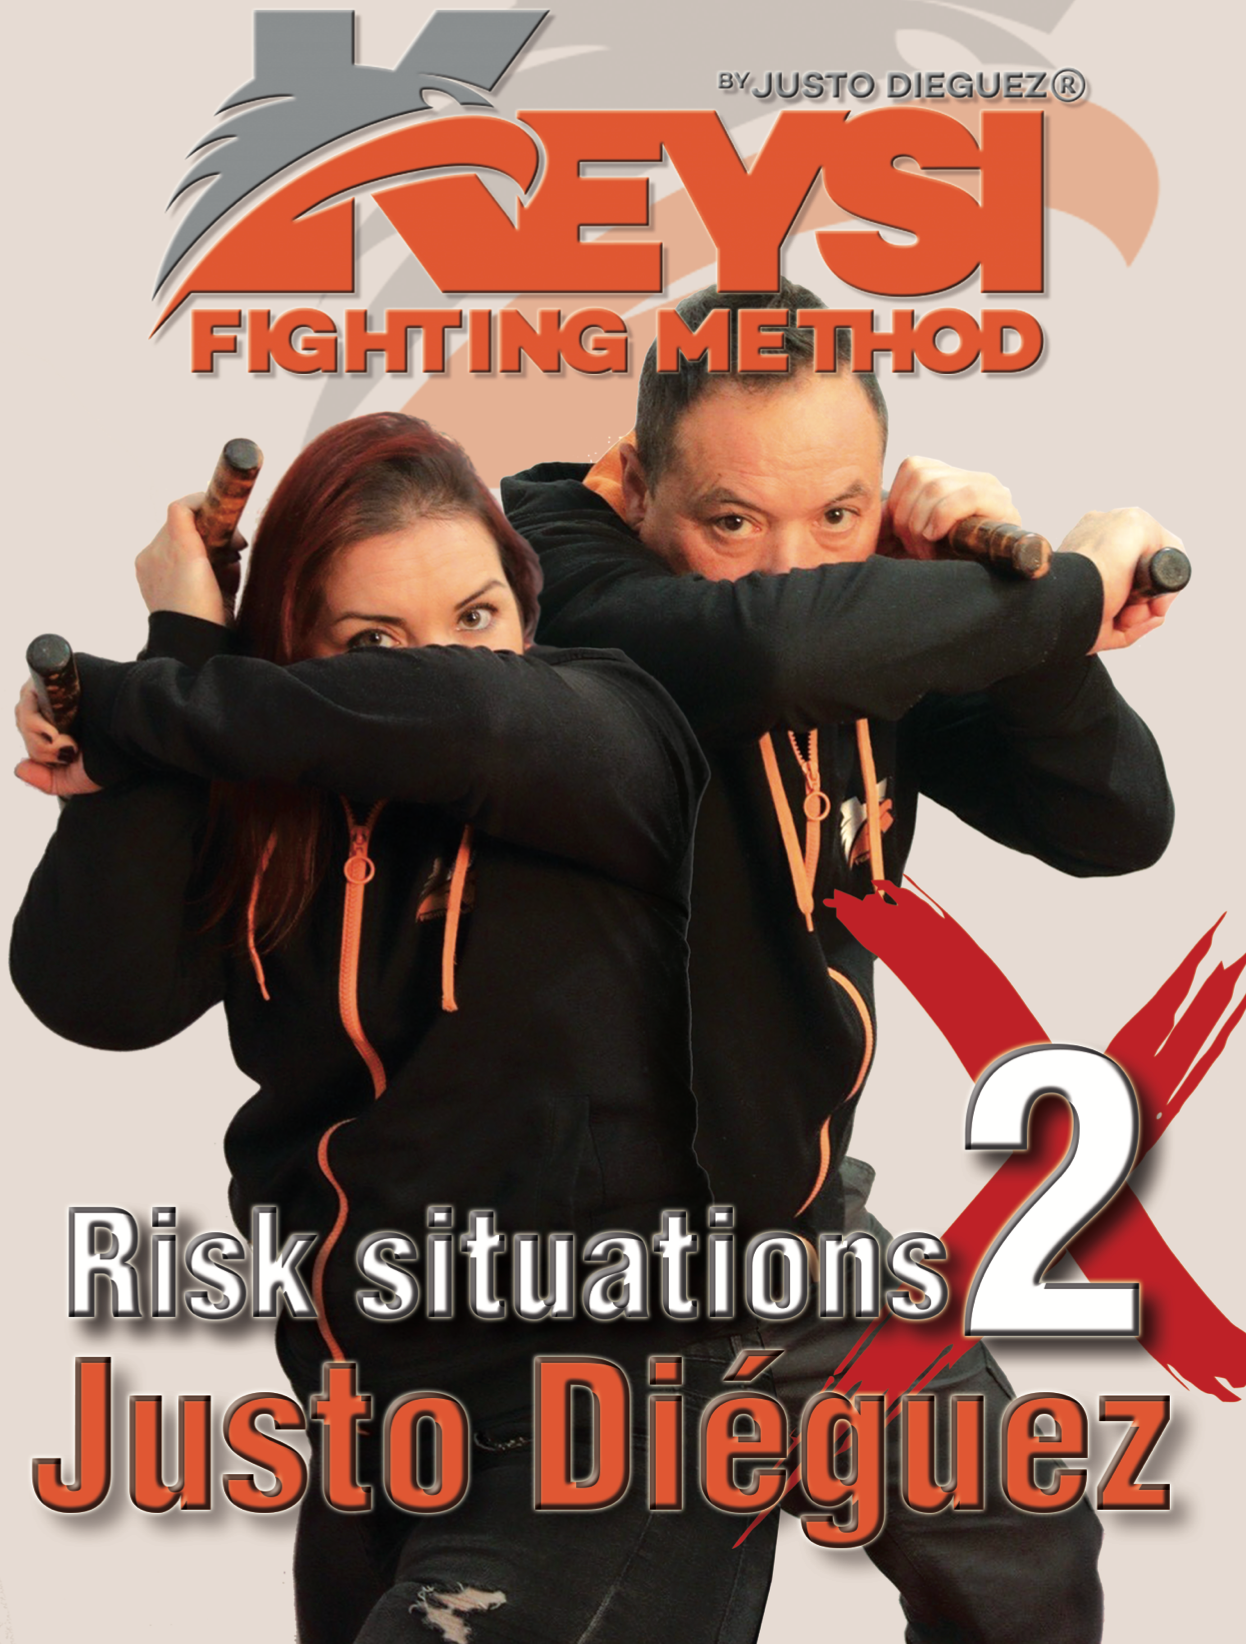 Keysi Risk Situations Vol 2 DVD with Justo Dieguez - Budovideos